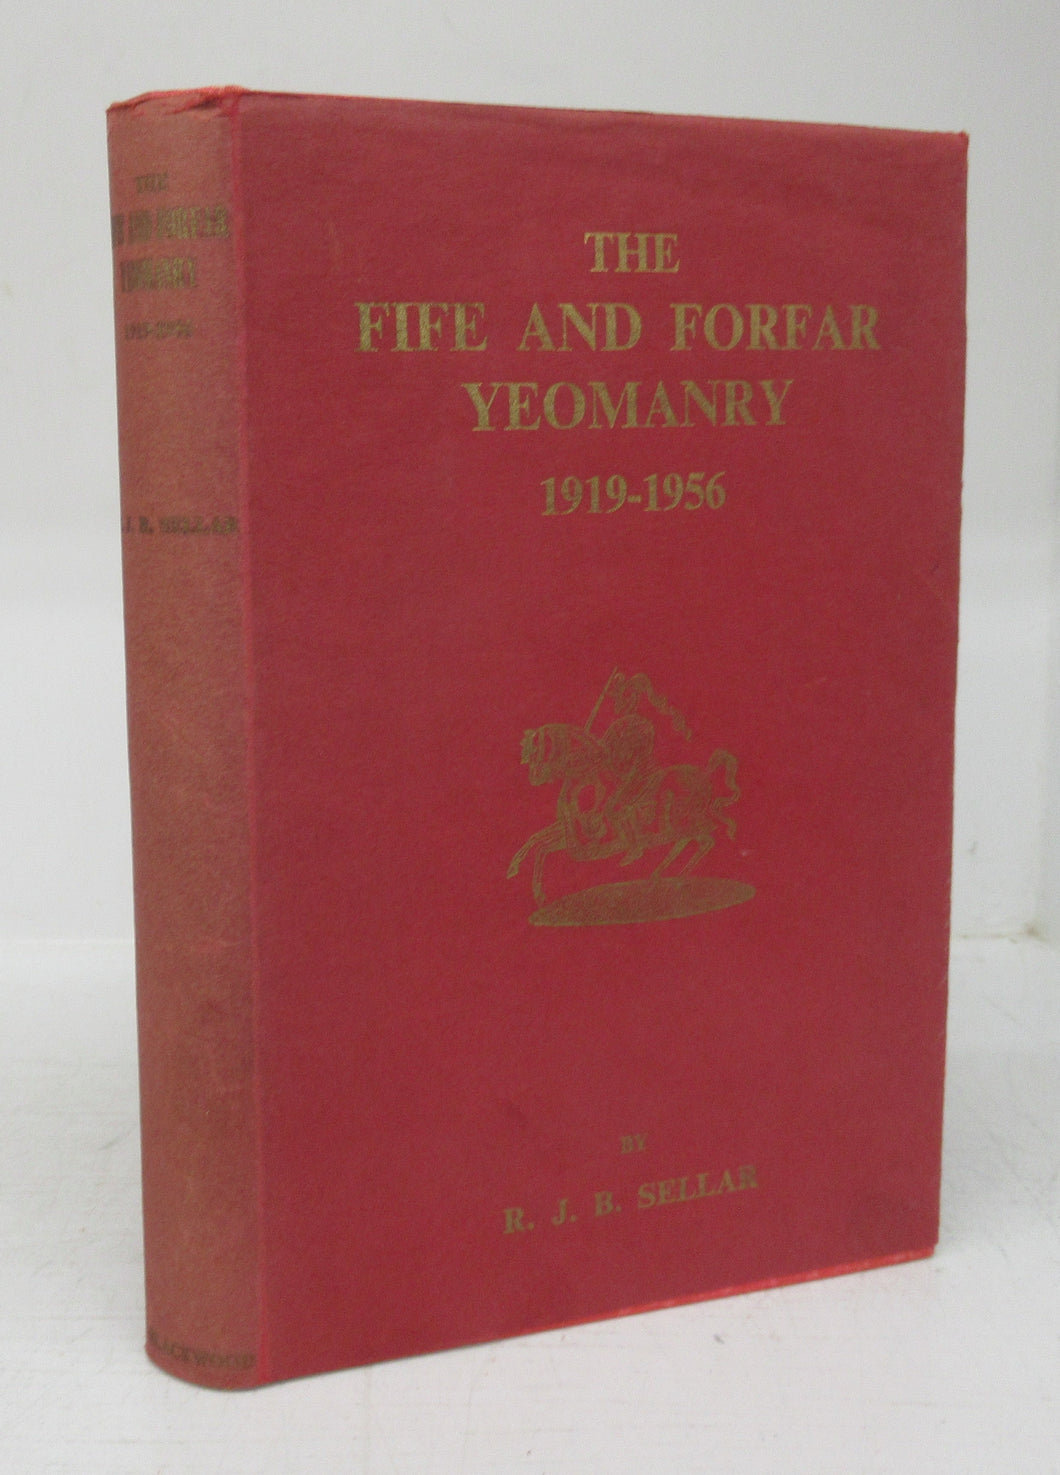 The Fife and Forfar Yeomanry 1919-1956